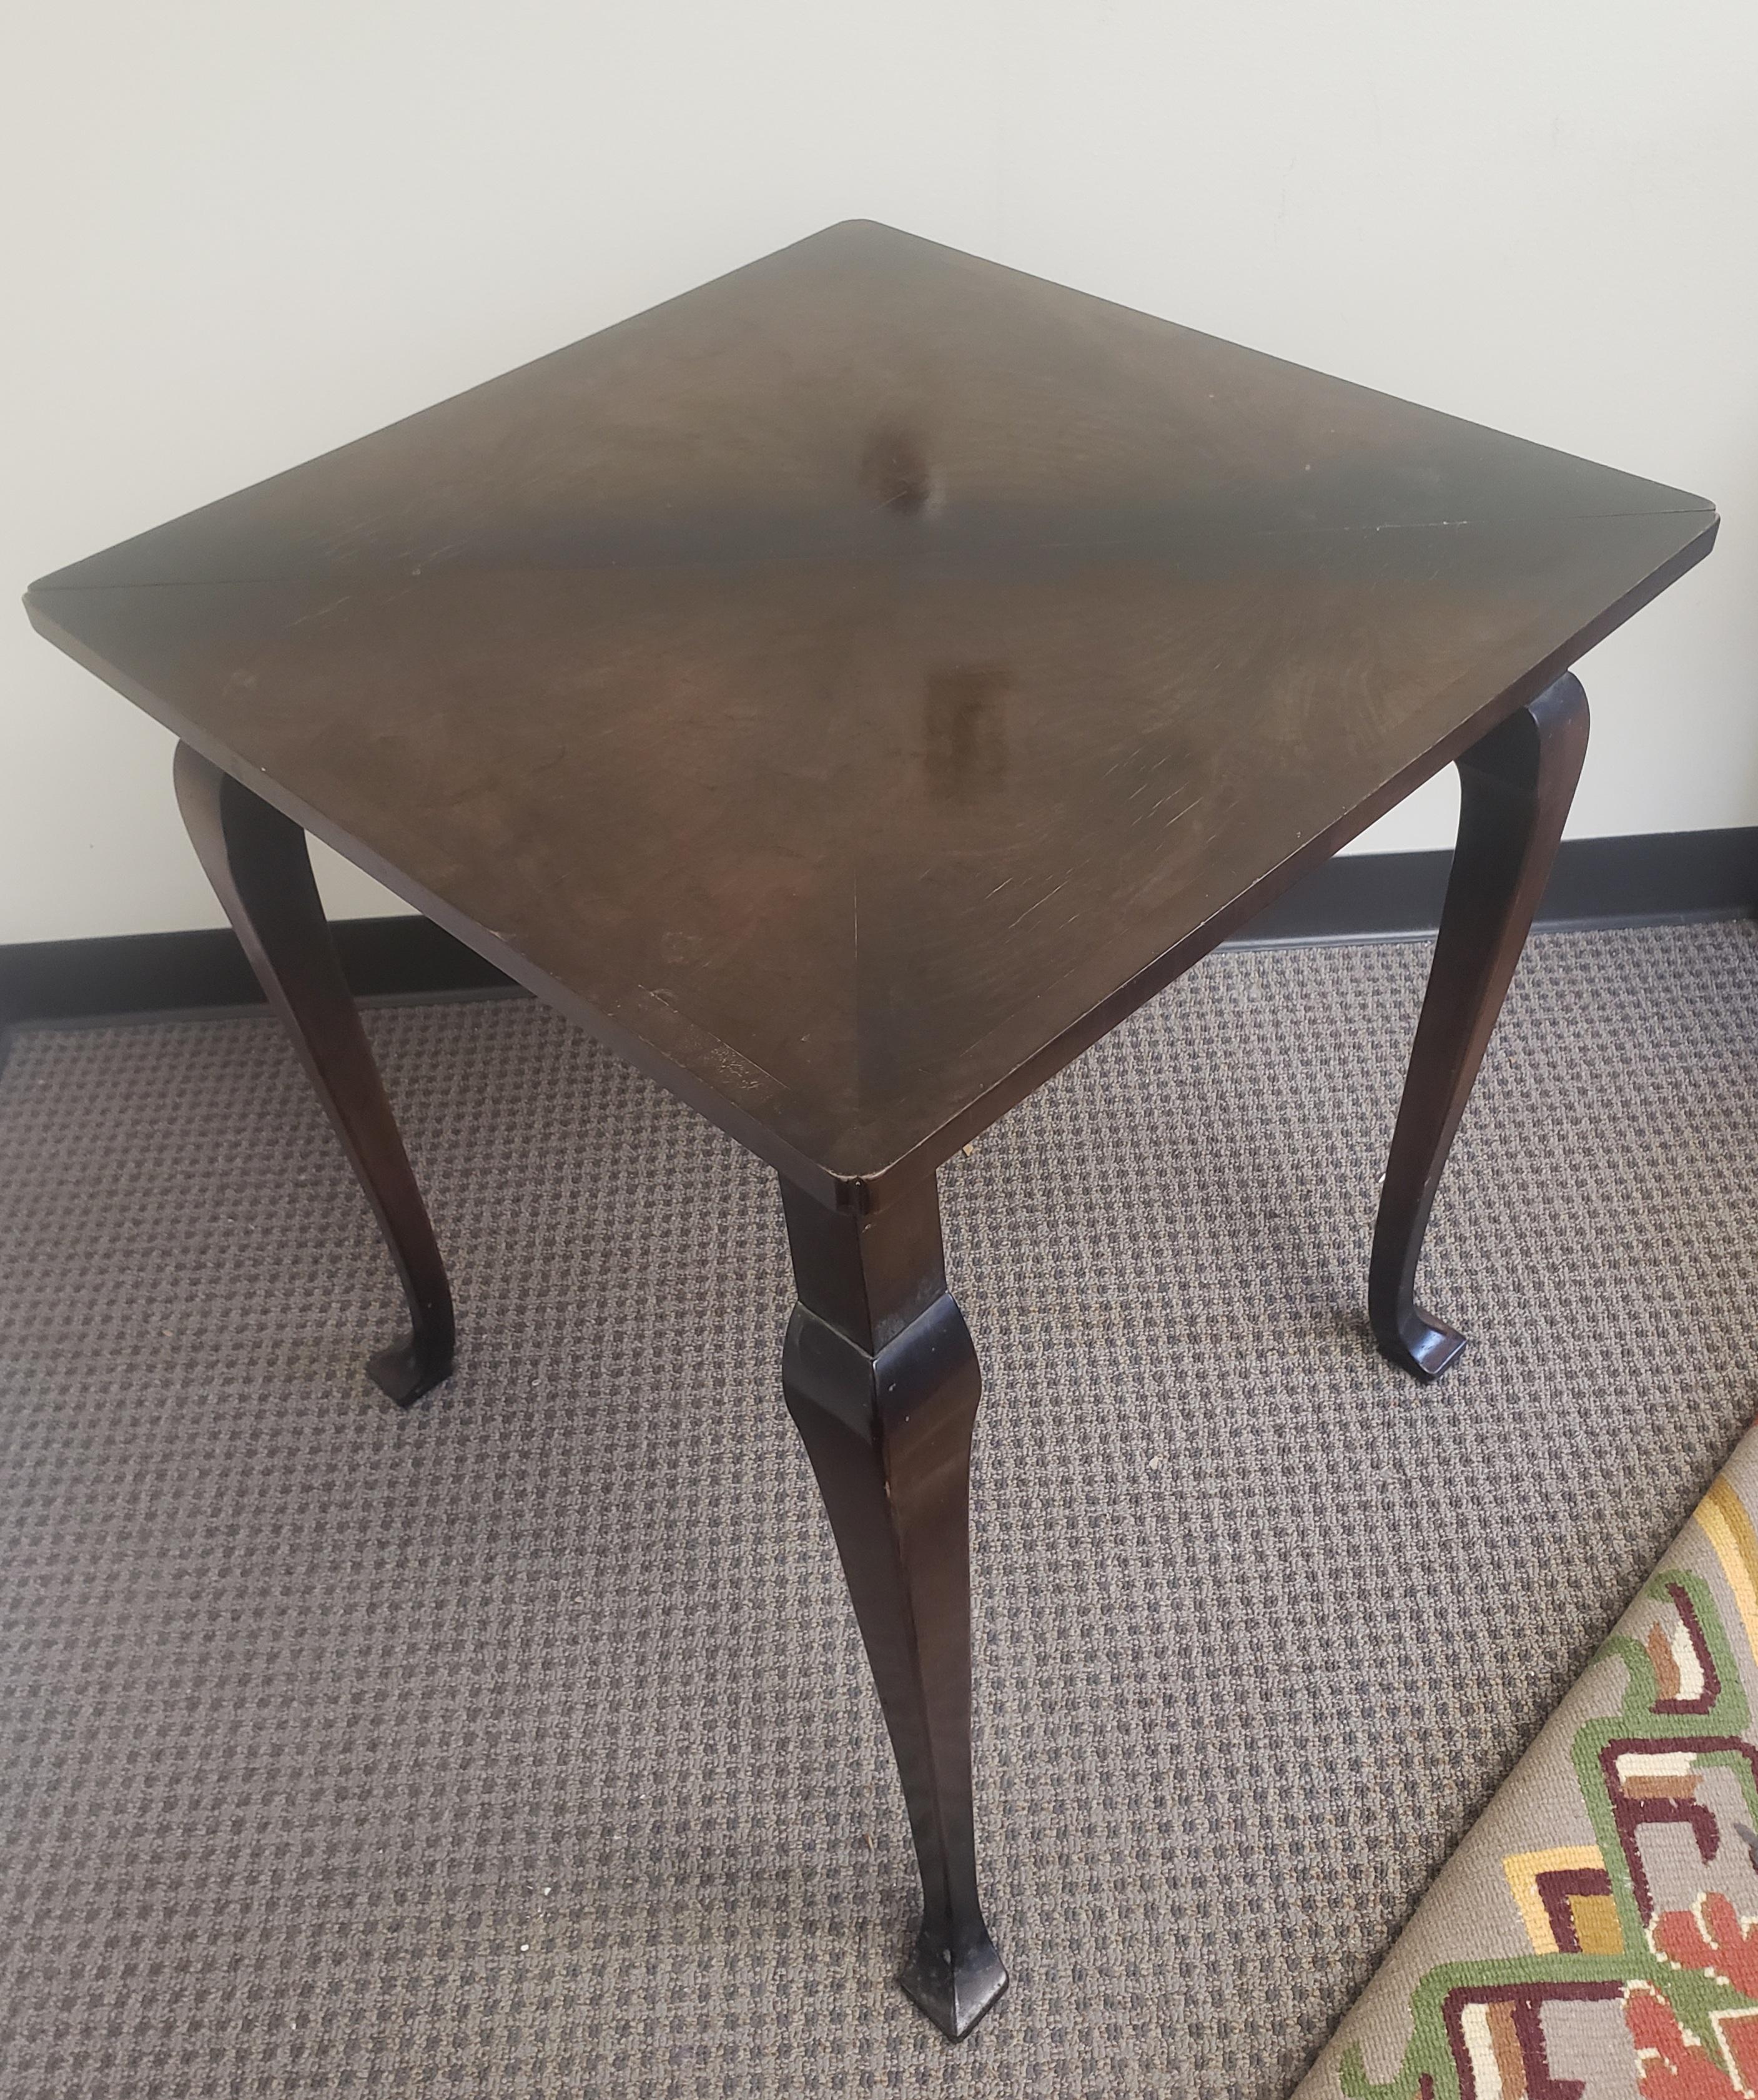 19th Century Rare English Walnut and Burl Handkerchief Card Table Tea Table In Good Condition For Sale In Germantown, MD